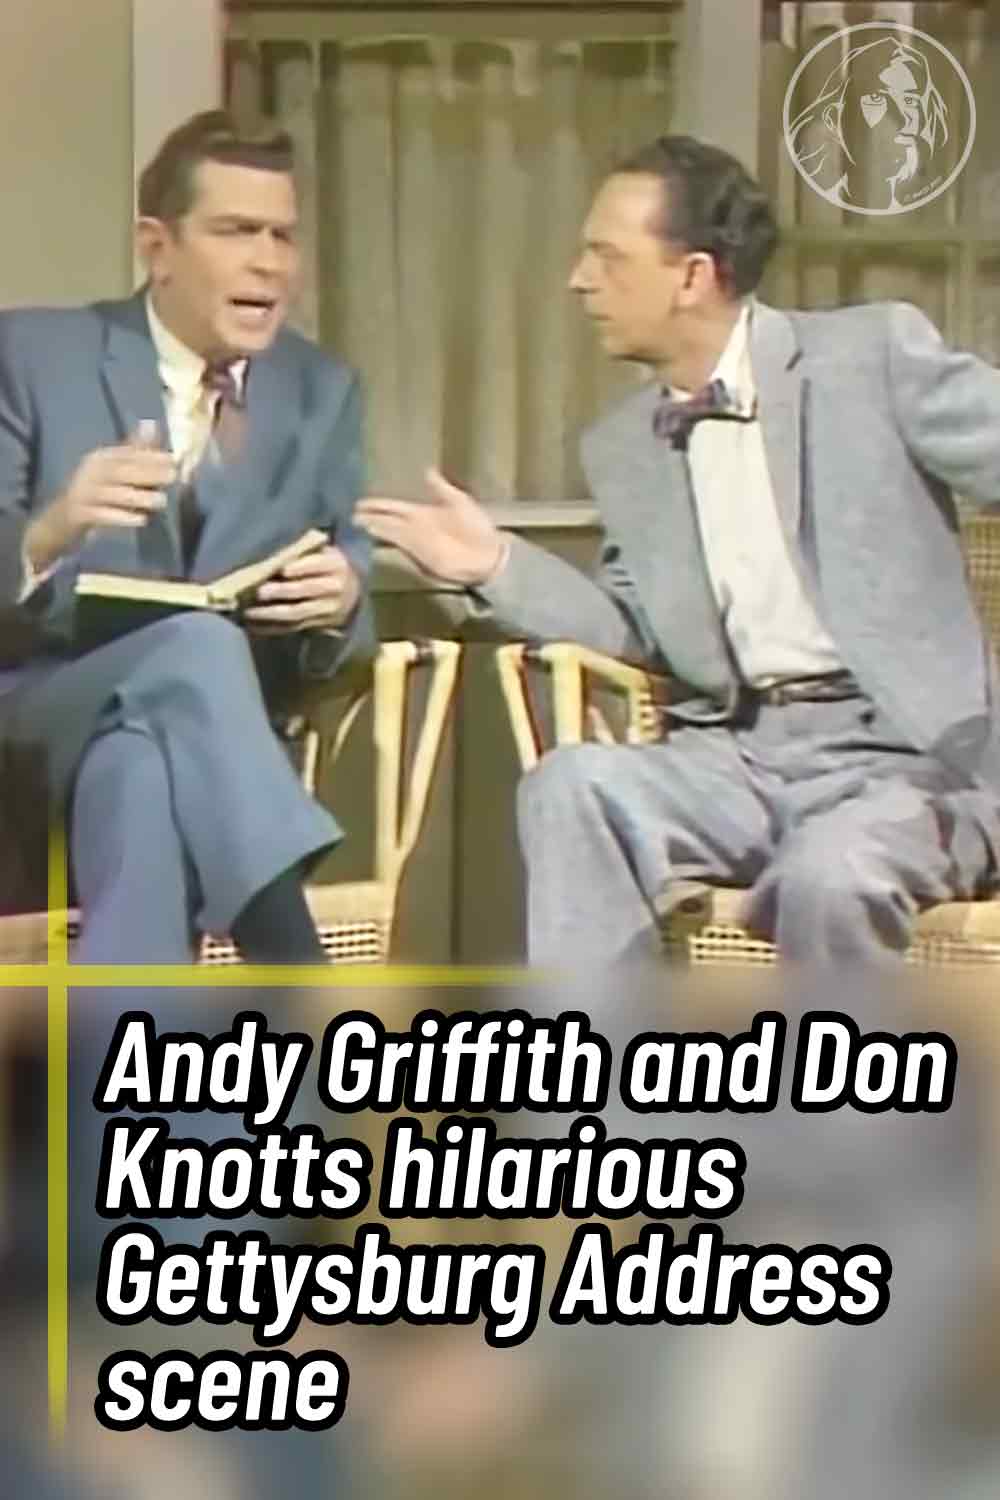 Andy Griffith and Don Knotts hilarious Gettysburg Address scene